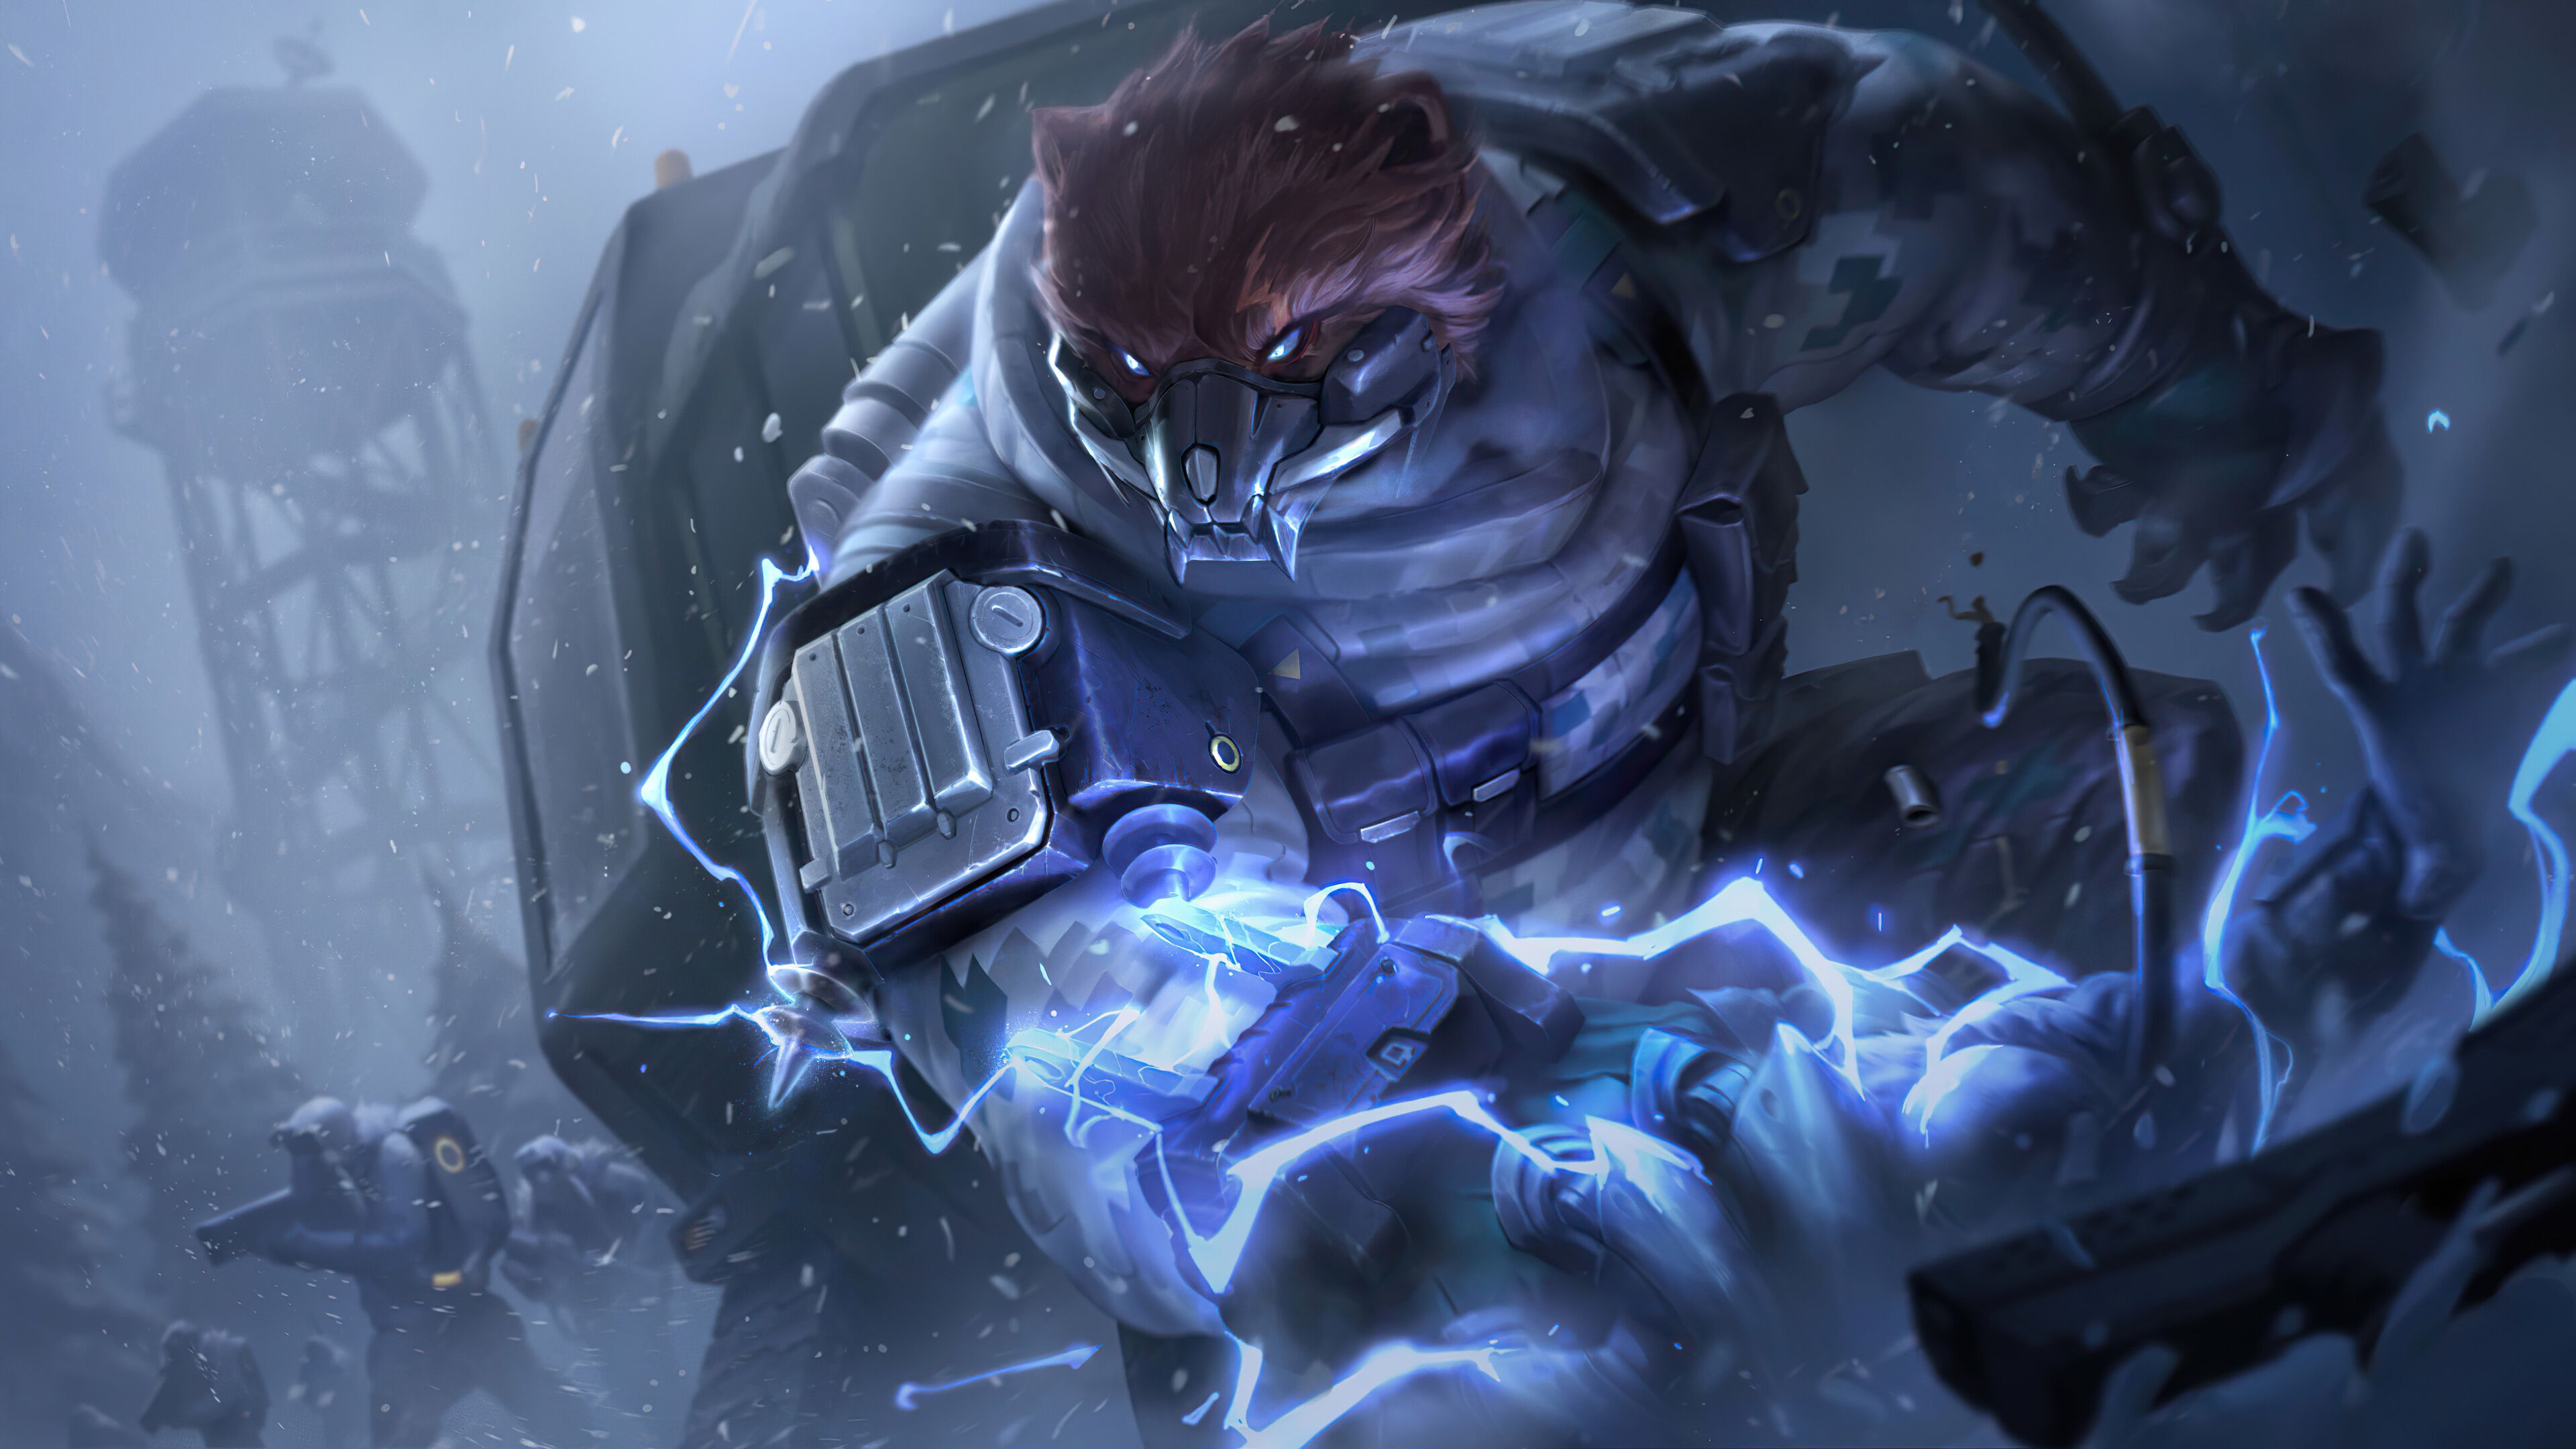 LOL Wallpapers 4K: Volibear rework skins (Thunderlord, Northern Storm, Runeguard, Captain, El Rayo, Thousand Pierced, Classic): League of Legends (Riot Games illustration)